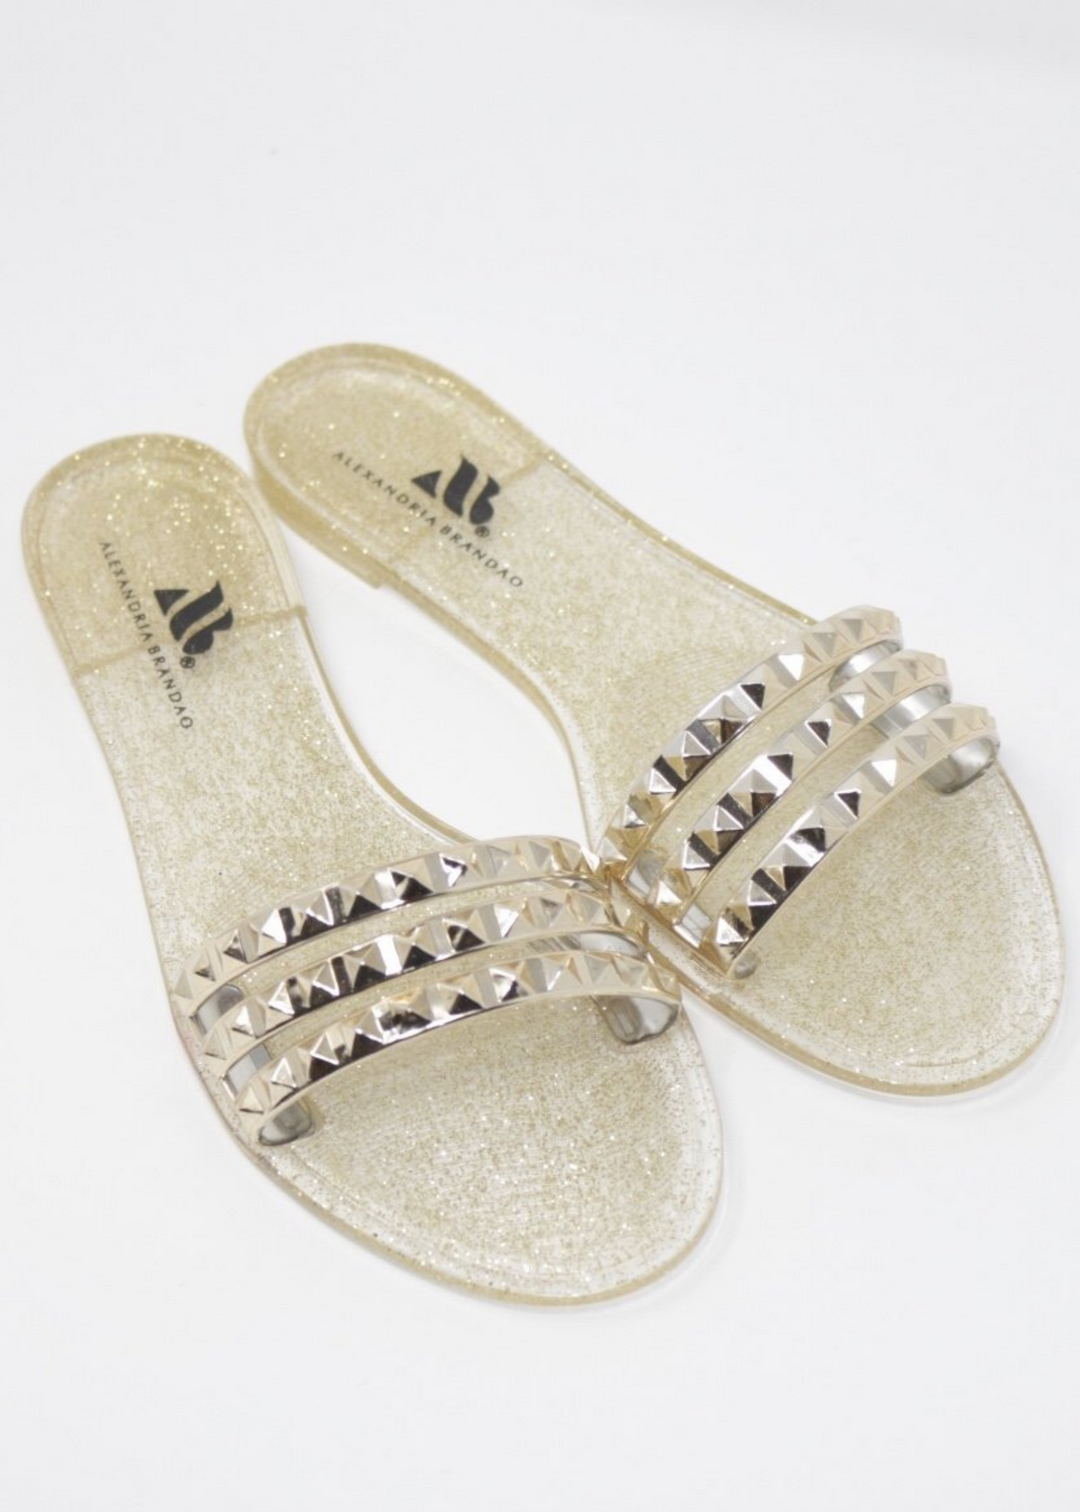 ARIA B GOLD THREE STRAP STUDDED SLIP ONS WITH GLITTER SOLE IN GOLD